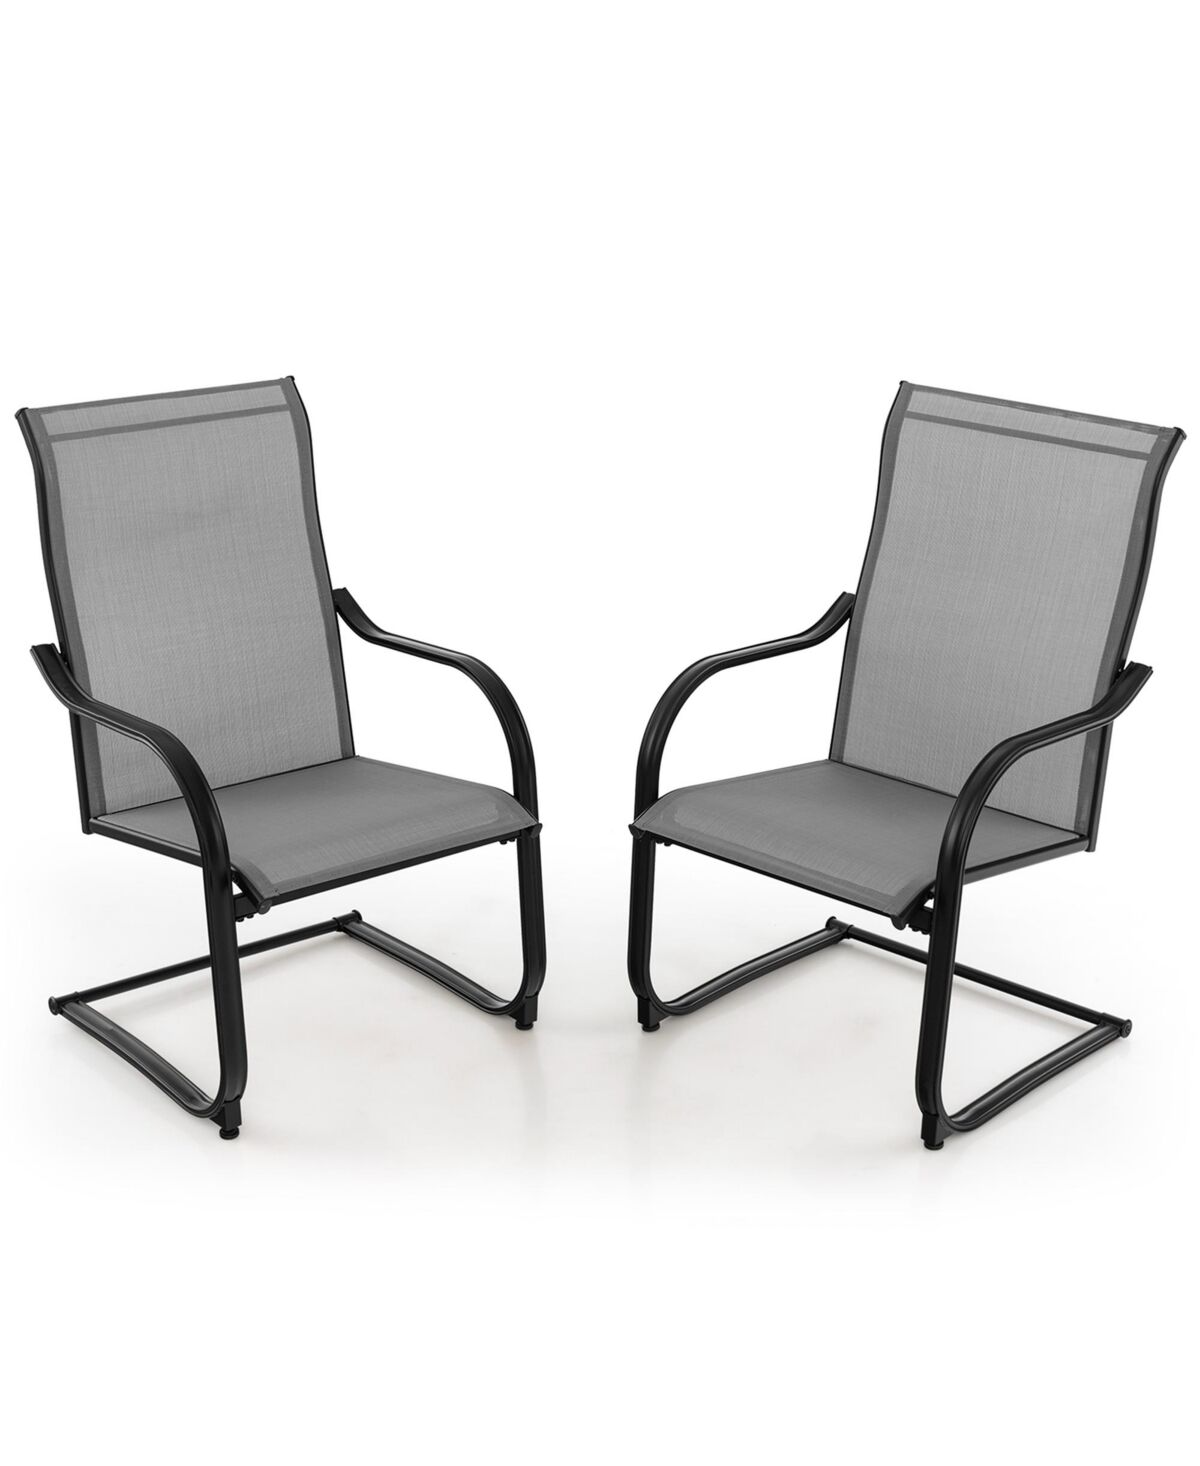 Costway 2pcs C-Spring Motion Patio Dining Chairs All Weather Heavy Duty Outdoor - Grey